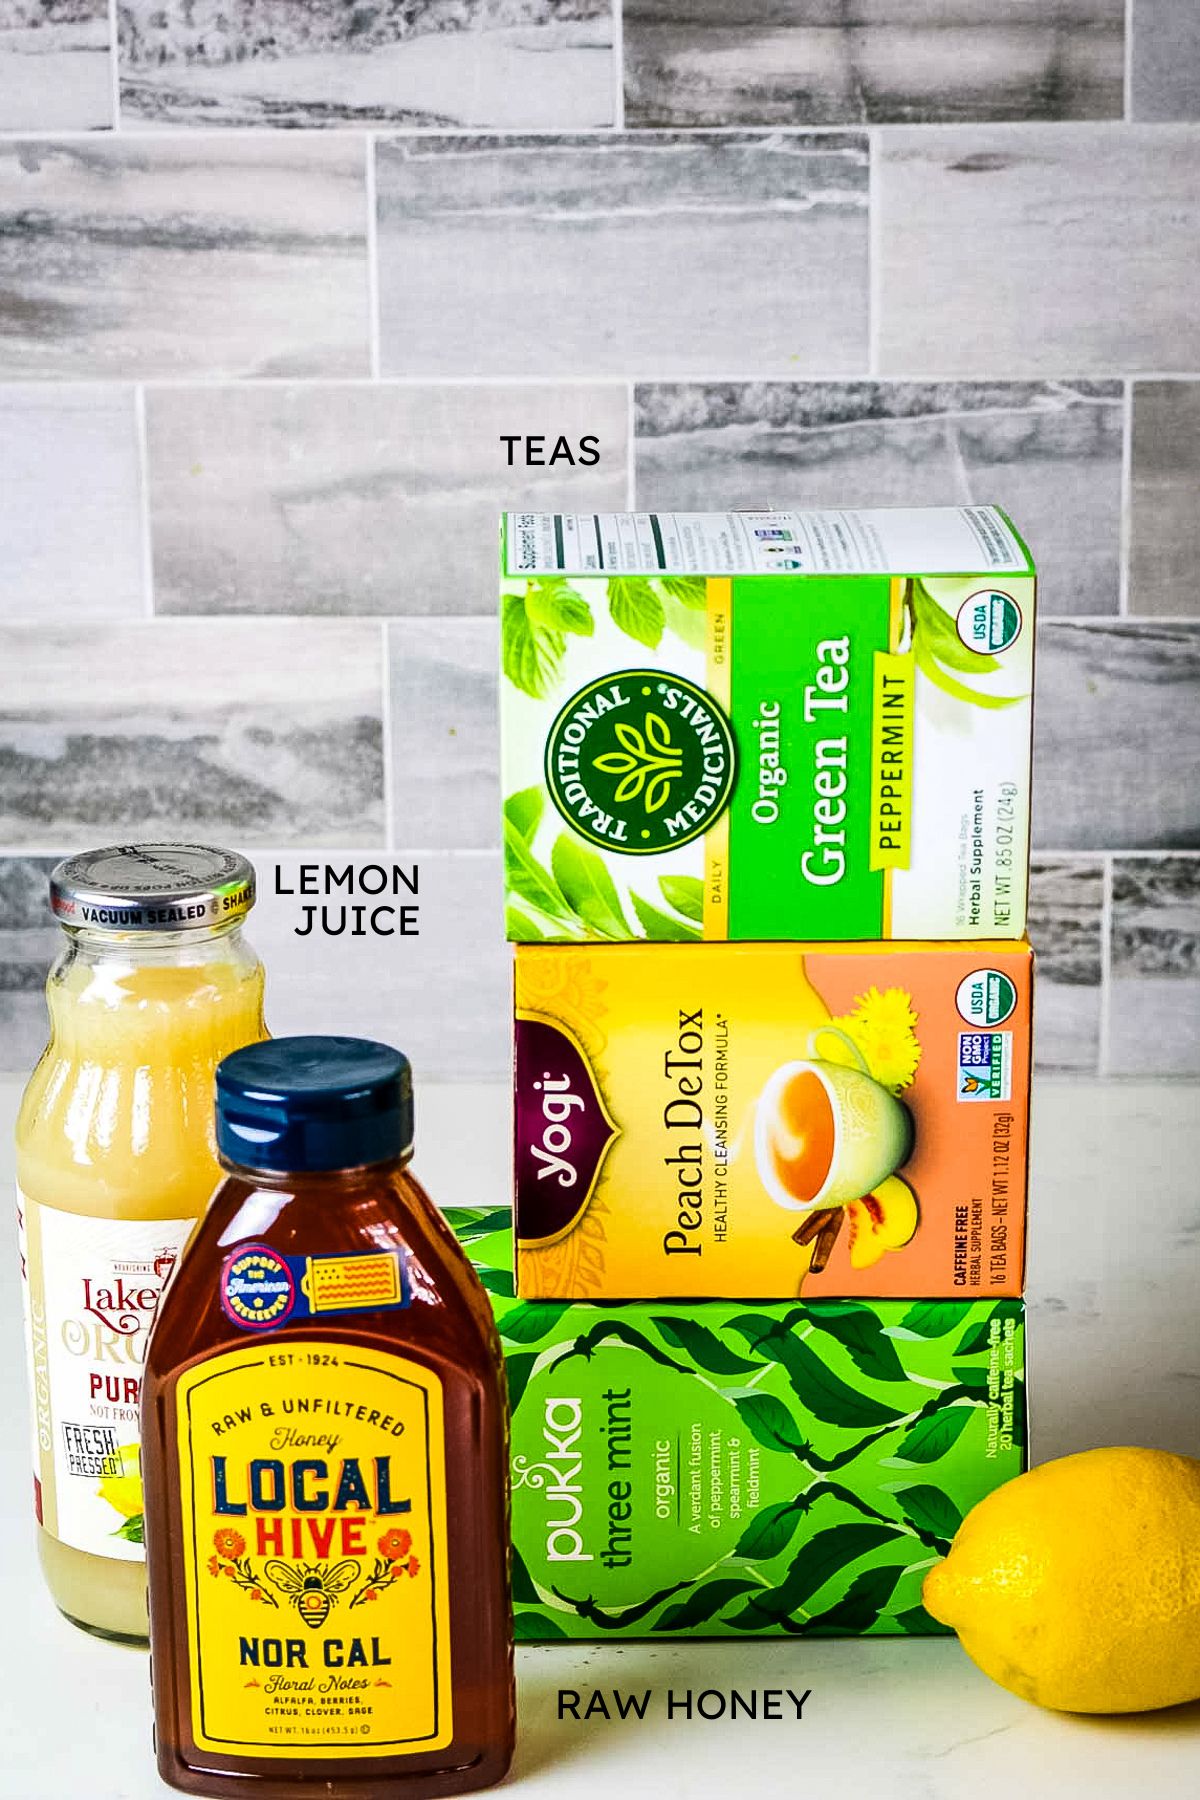 stack of three different tea boxes, fresh lemon, lemon juice in bottle and local and raw honey bottle.